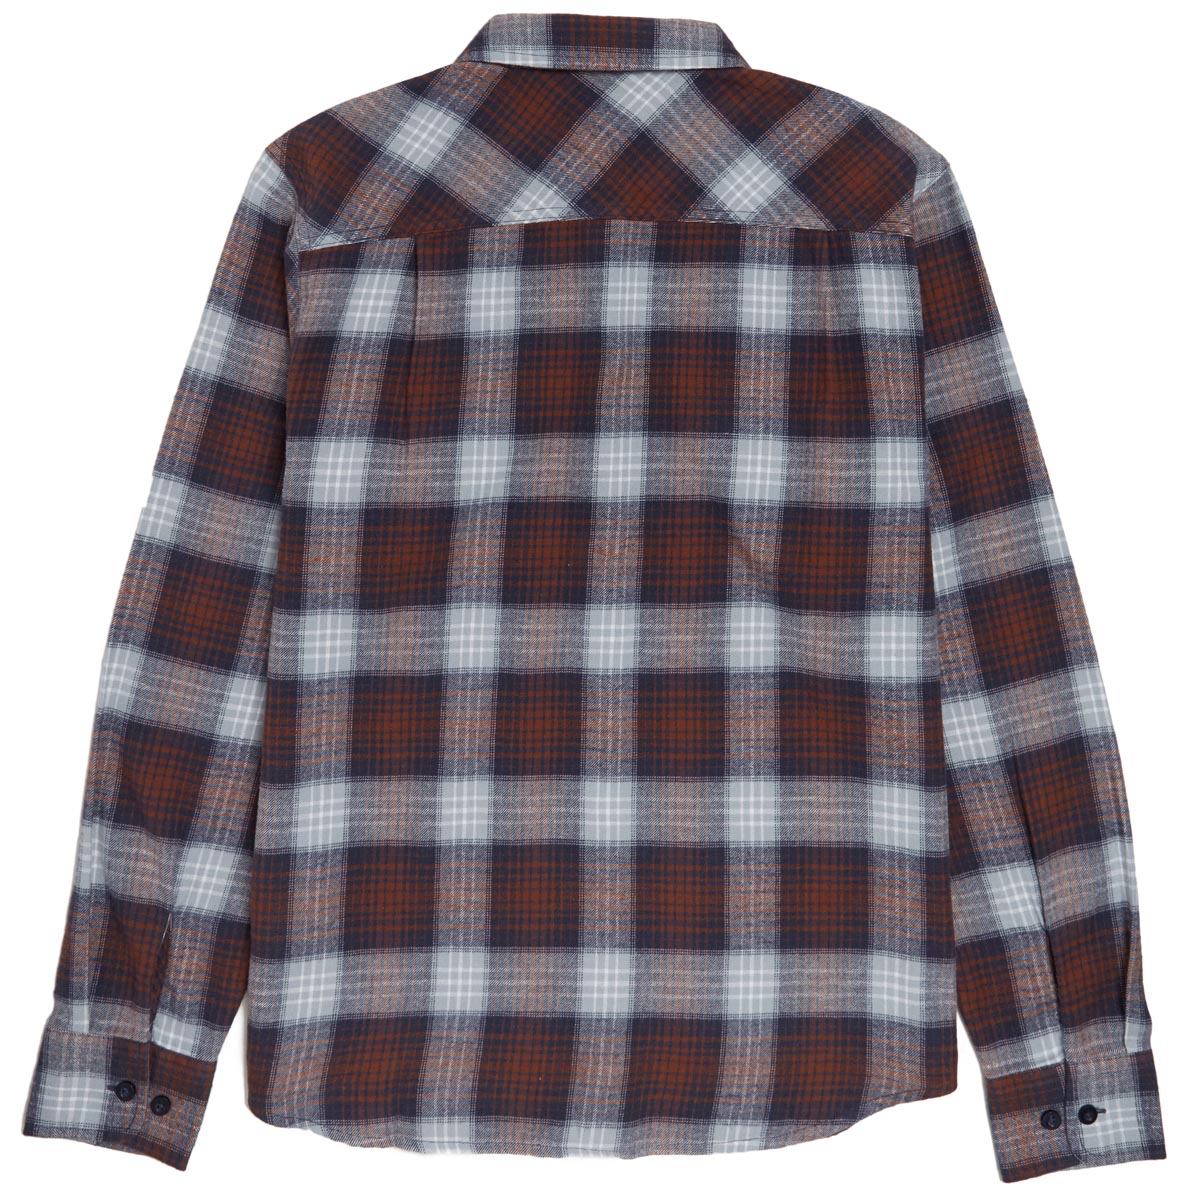 Brixton Bowery Lightweight Ultra Flannel Shirt - Washed Navy/Dusty Blue image 2